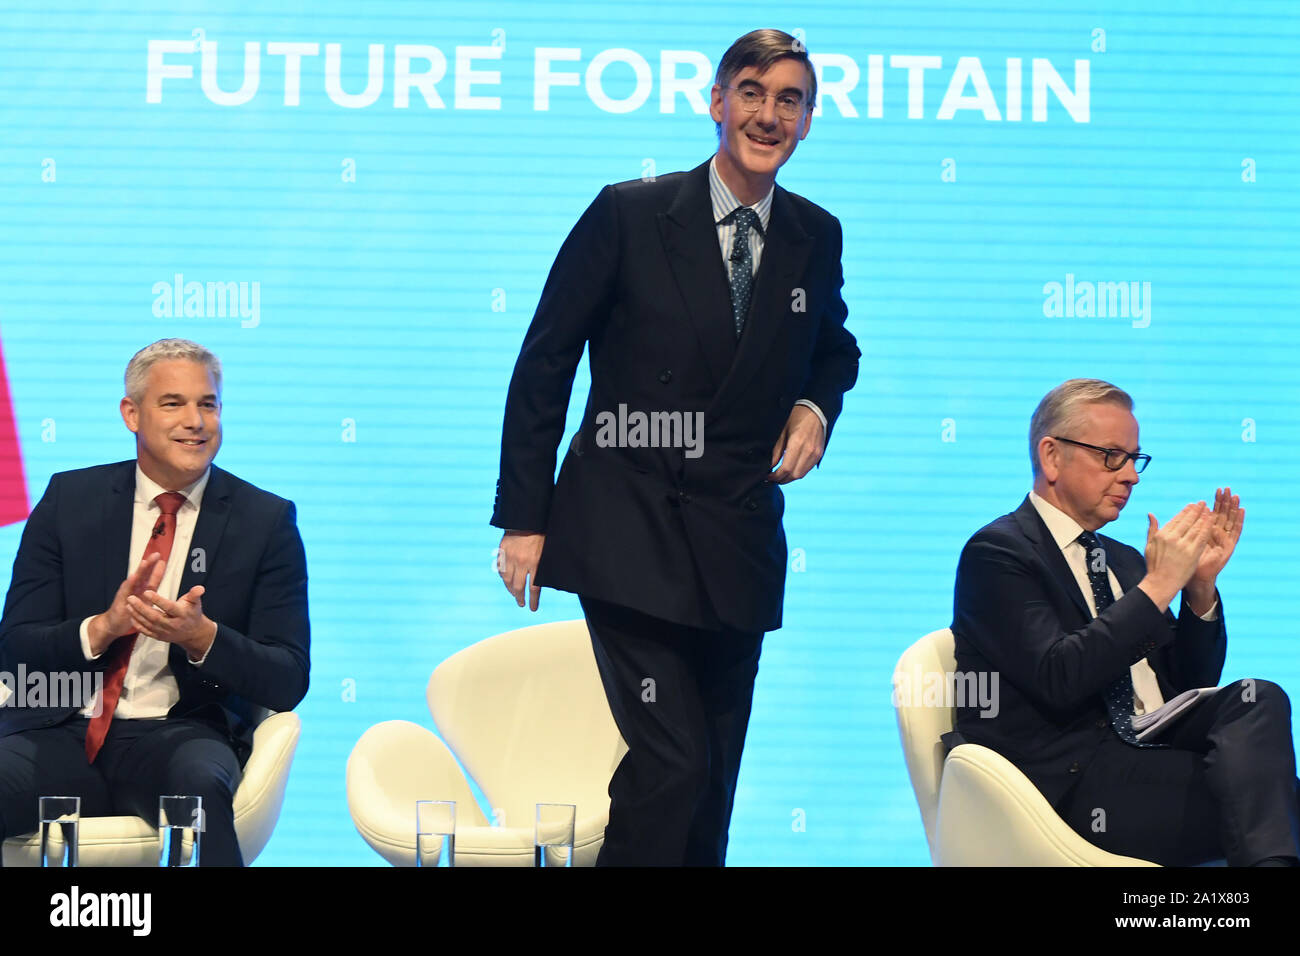 (left to right) Brexit Secretary Stephen Barclay, Leader of the House of Commons Jacob Rees-Mogg and Chancellor of the Duchy of Lancaster Michael Gove on stage at the Conservative Party Conference being held at the Manchester Convention Centre. Stock Photo